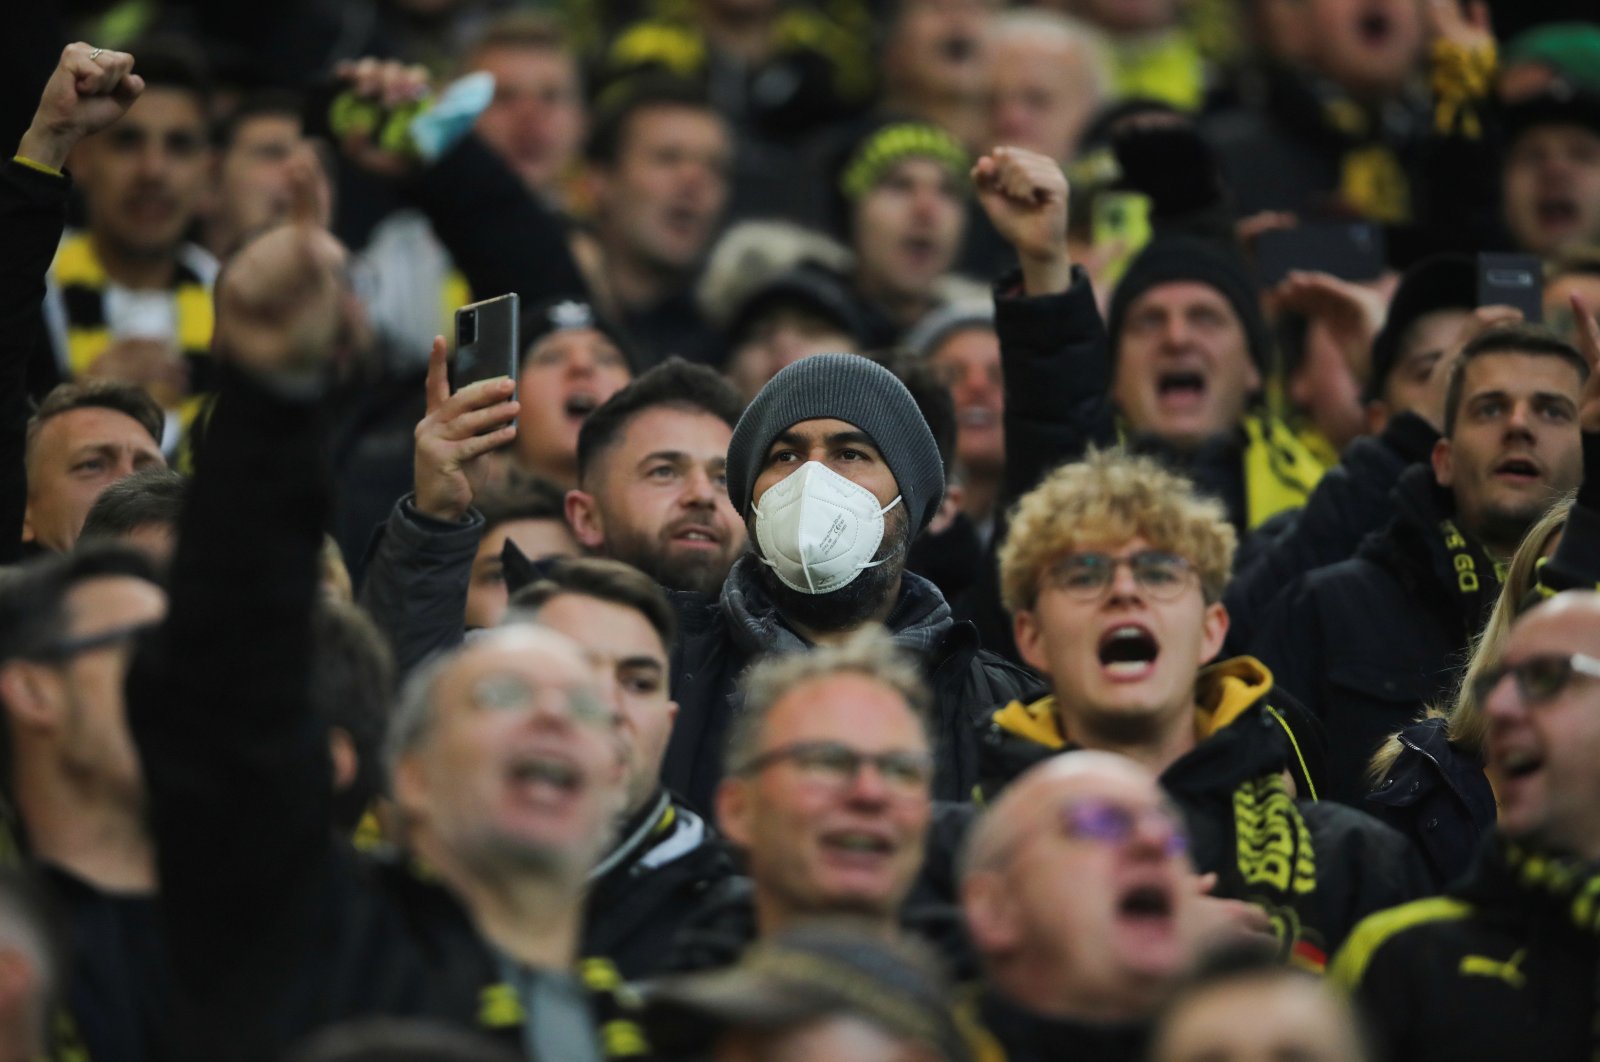 A Borussia Dortmund fan wears a protective face mask during a match against VfB Stuttgart at the Signal Iduna Park, Germany, Nov. 20, 2021. (Reuters Photo)